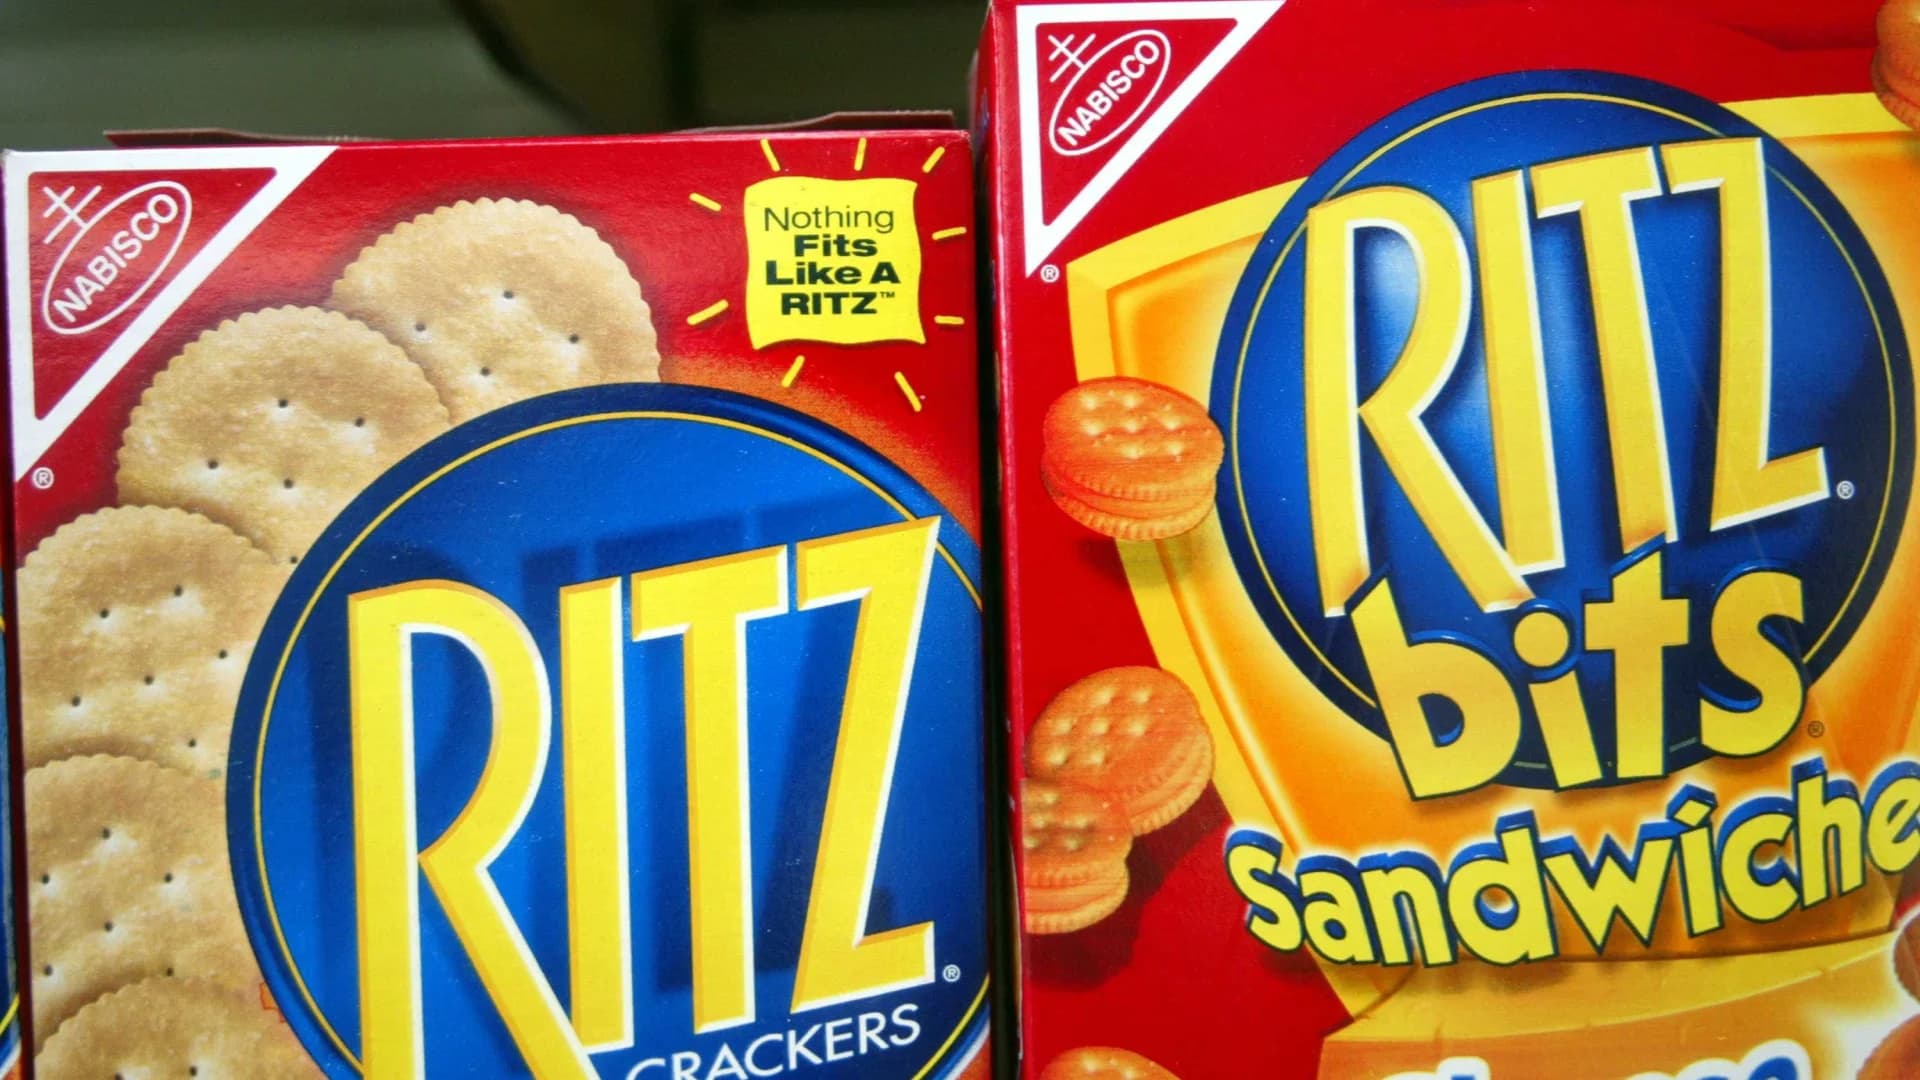 Some Ritz cracker products recalled over salmonella risk